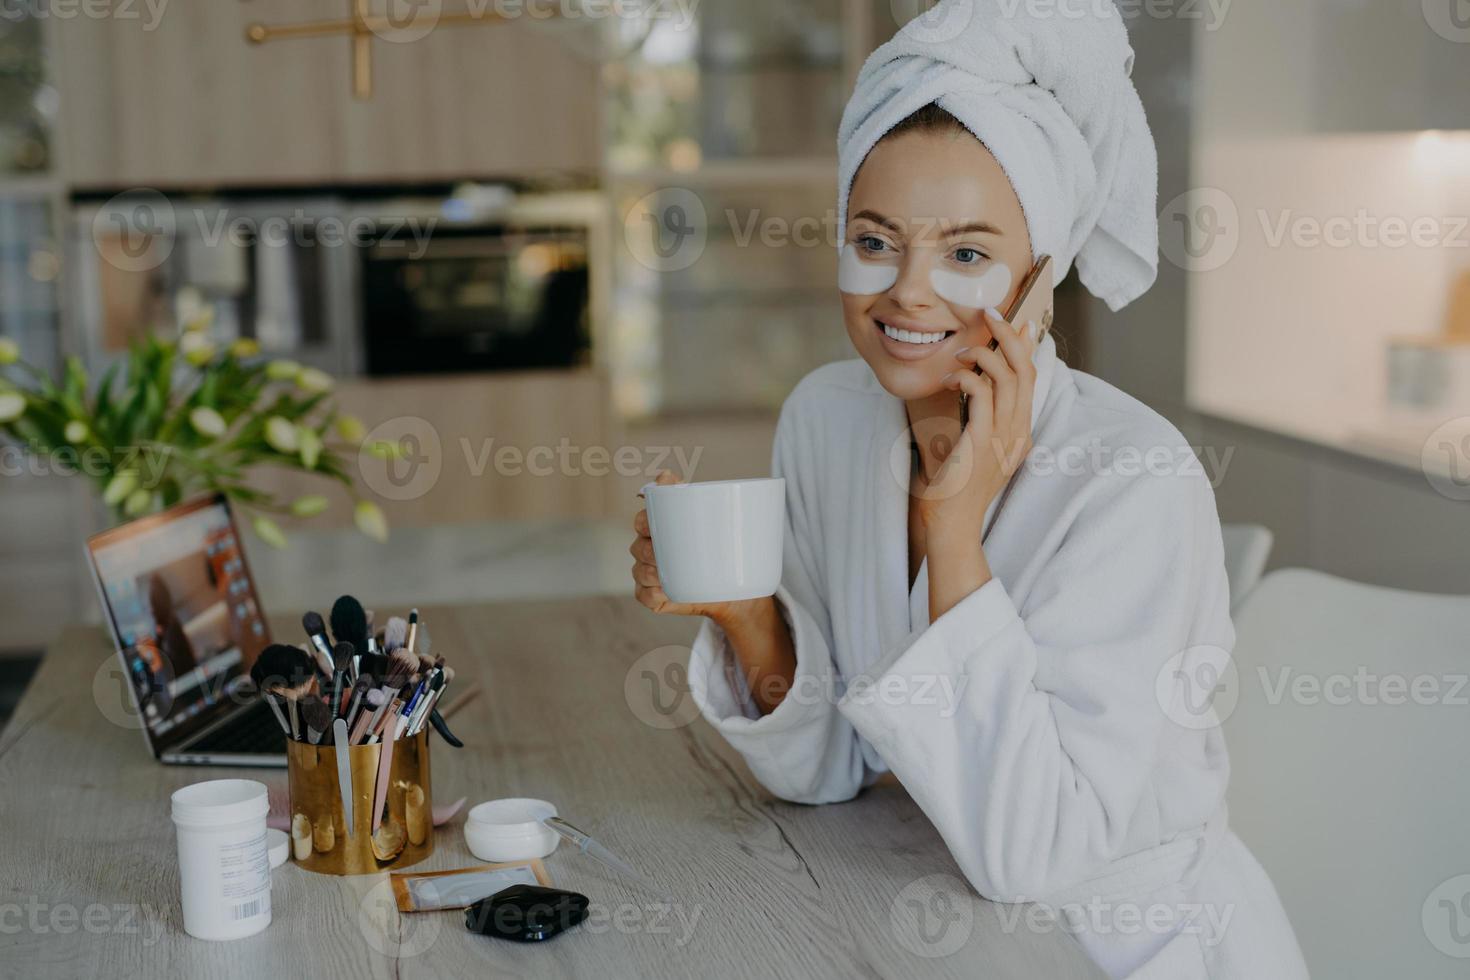 Beauty treatment personal care and hygiene concept. Lovely young woman applies cosmetic patches under eyes wears bathrobe drinks coffee talks to friend via smartphone sits at table over home interior photo